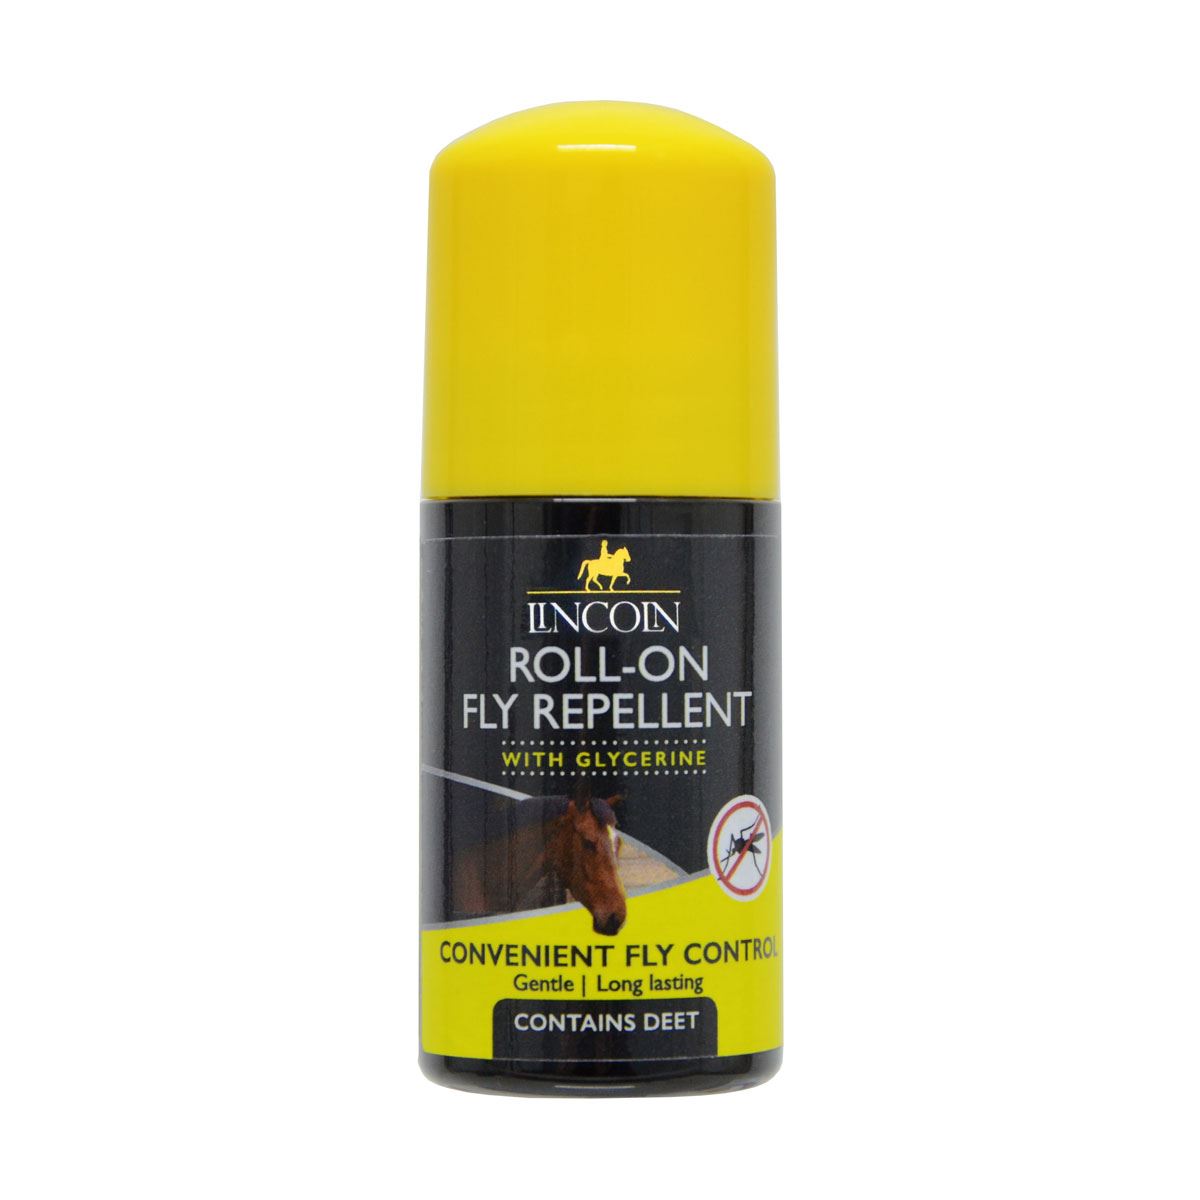 Lincoln Fly Repellent Roll-On - Just Horse Riders